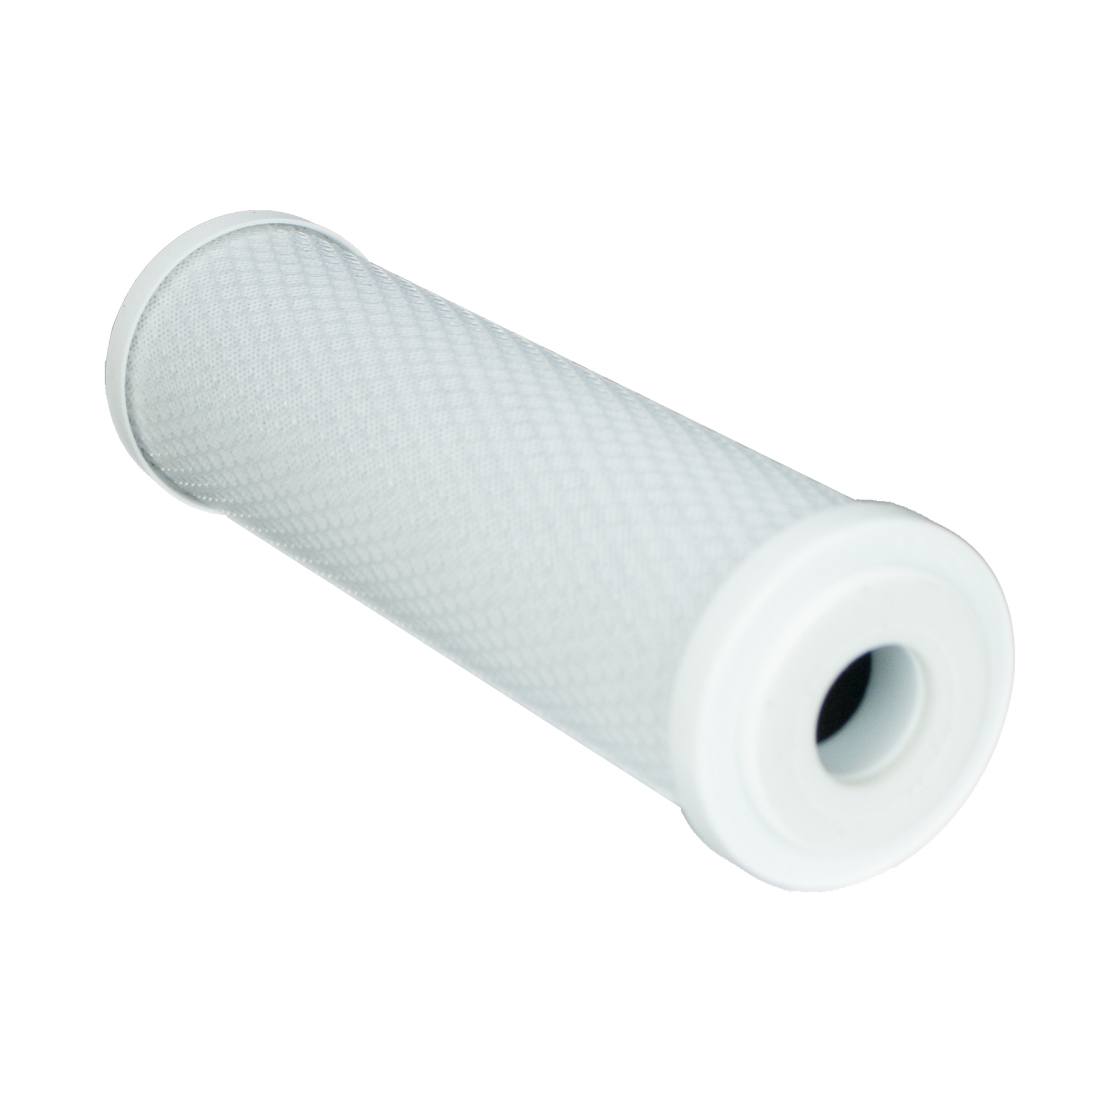 PWP Carbon Filter 10 Inch Full View